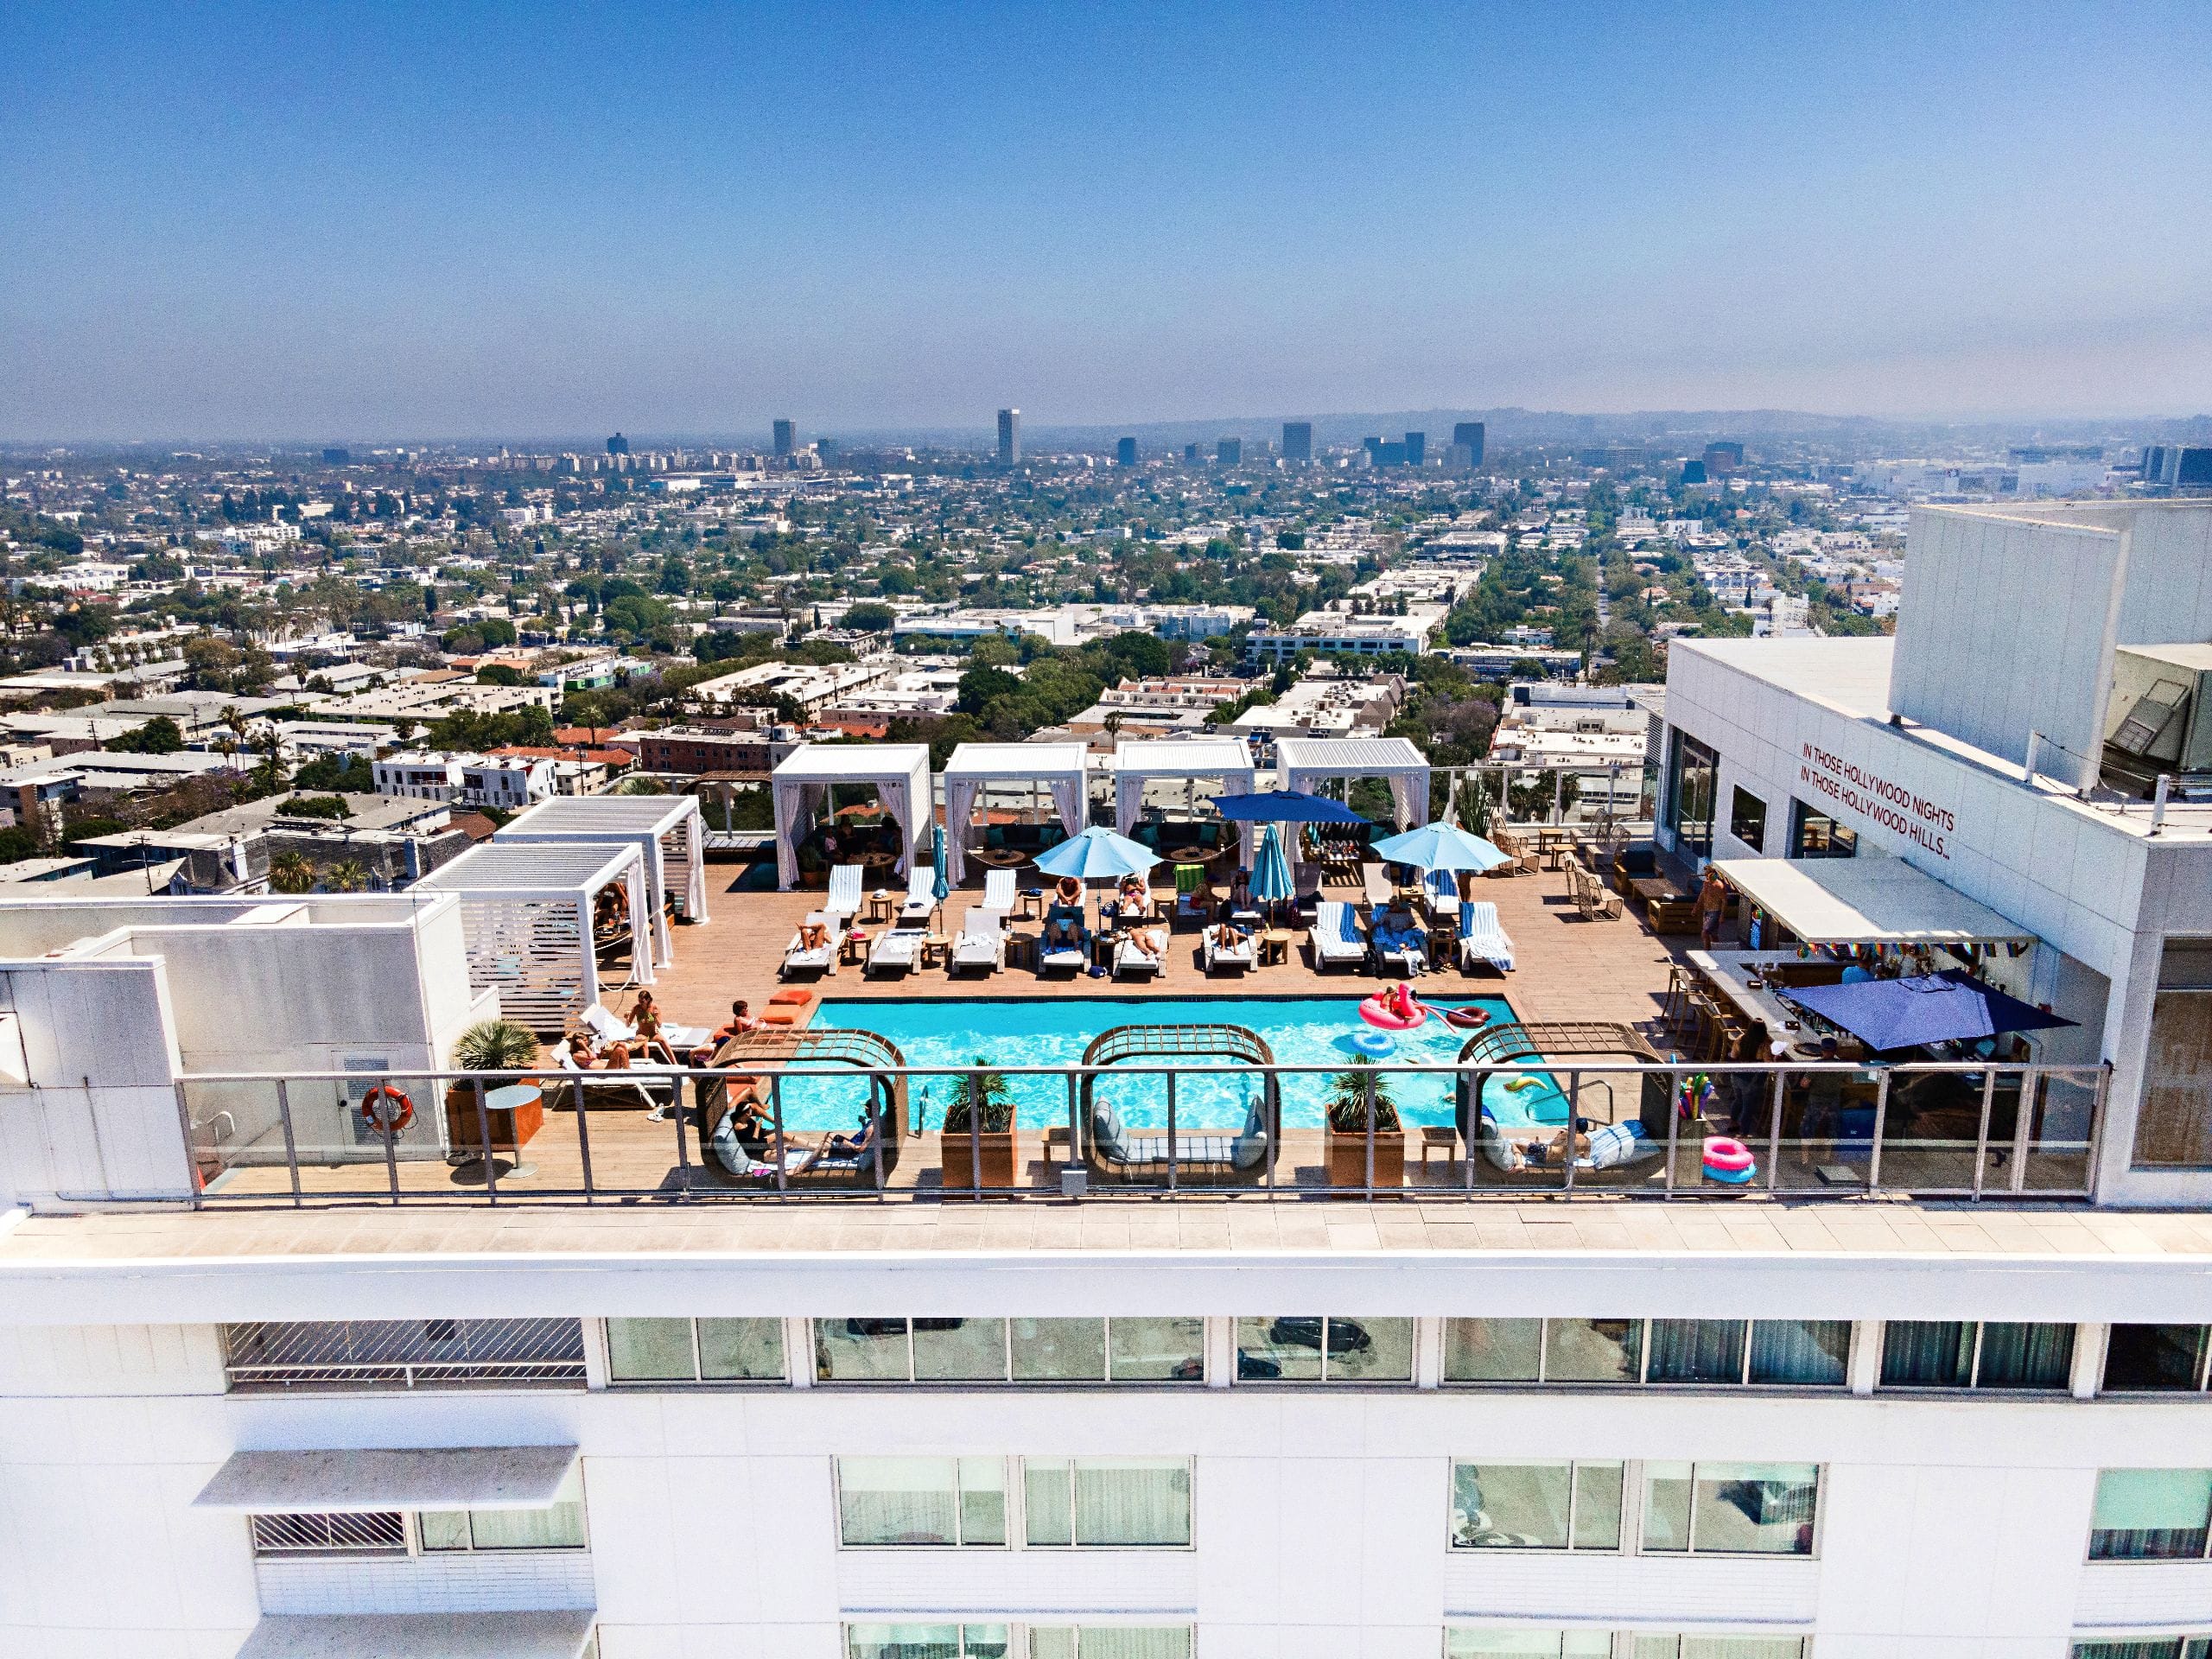 Andaz West Hollywood Rooftop Pool Skyline View